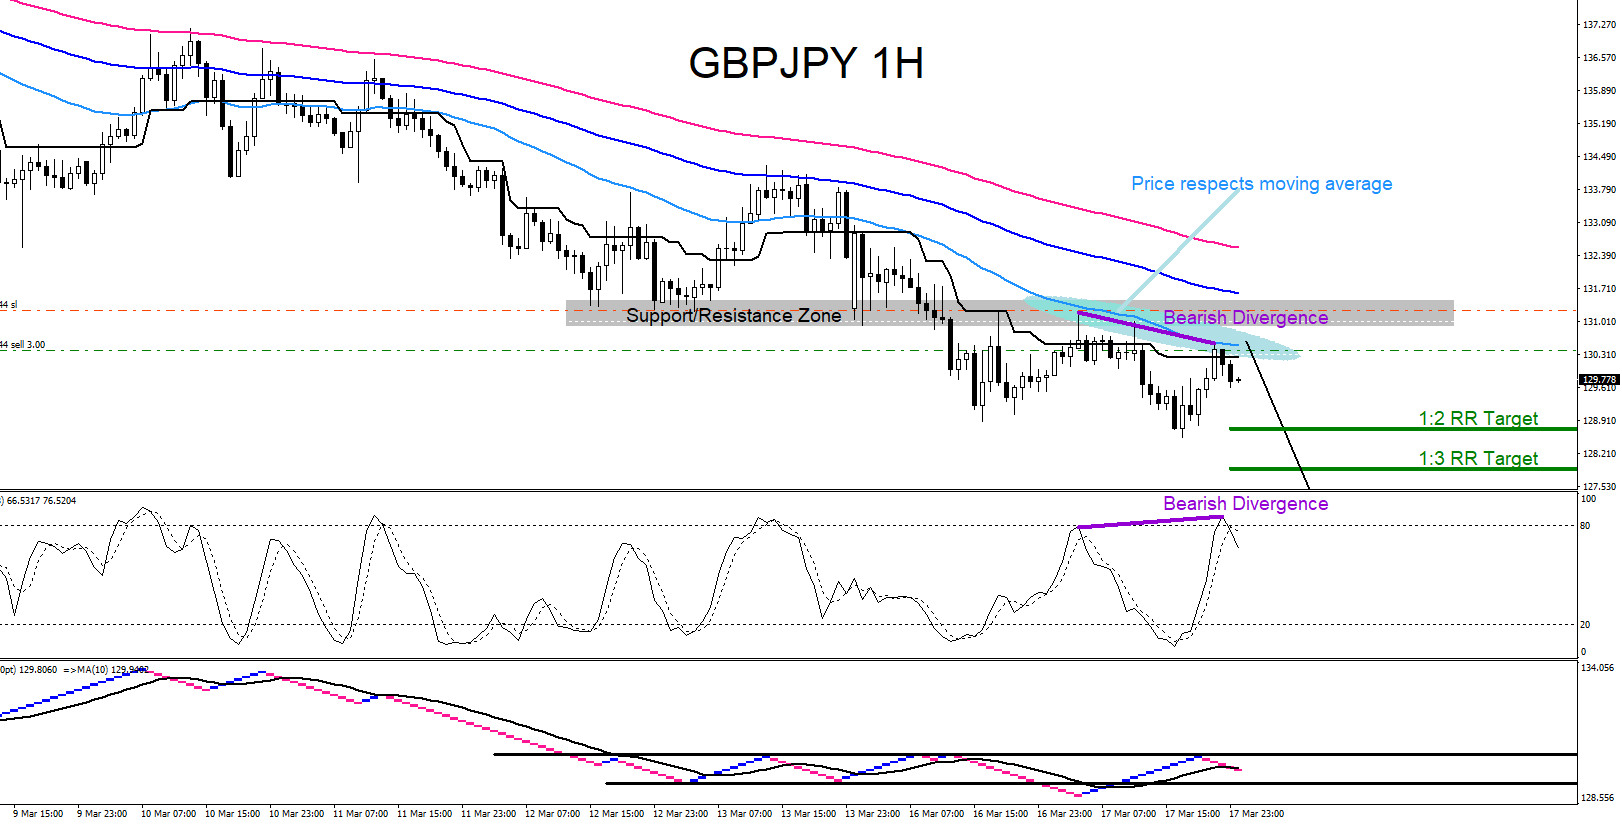 GBPJPY AUDJPY : Calling the Move Lower